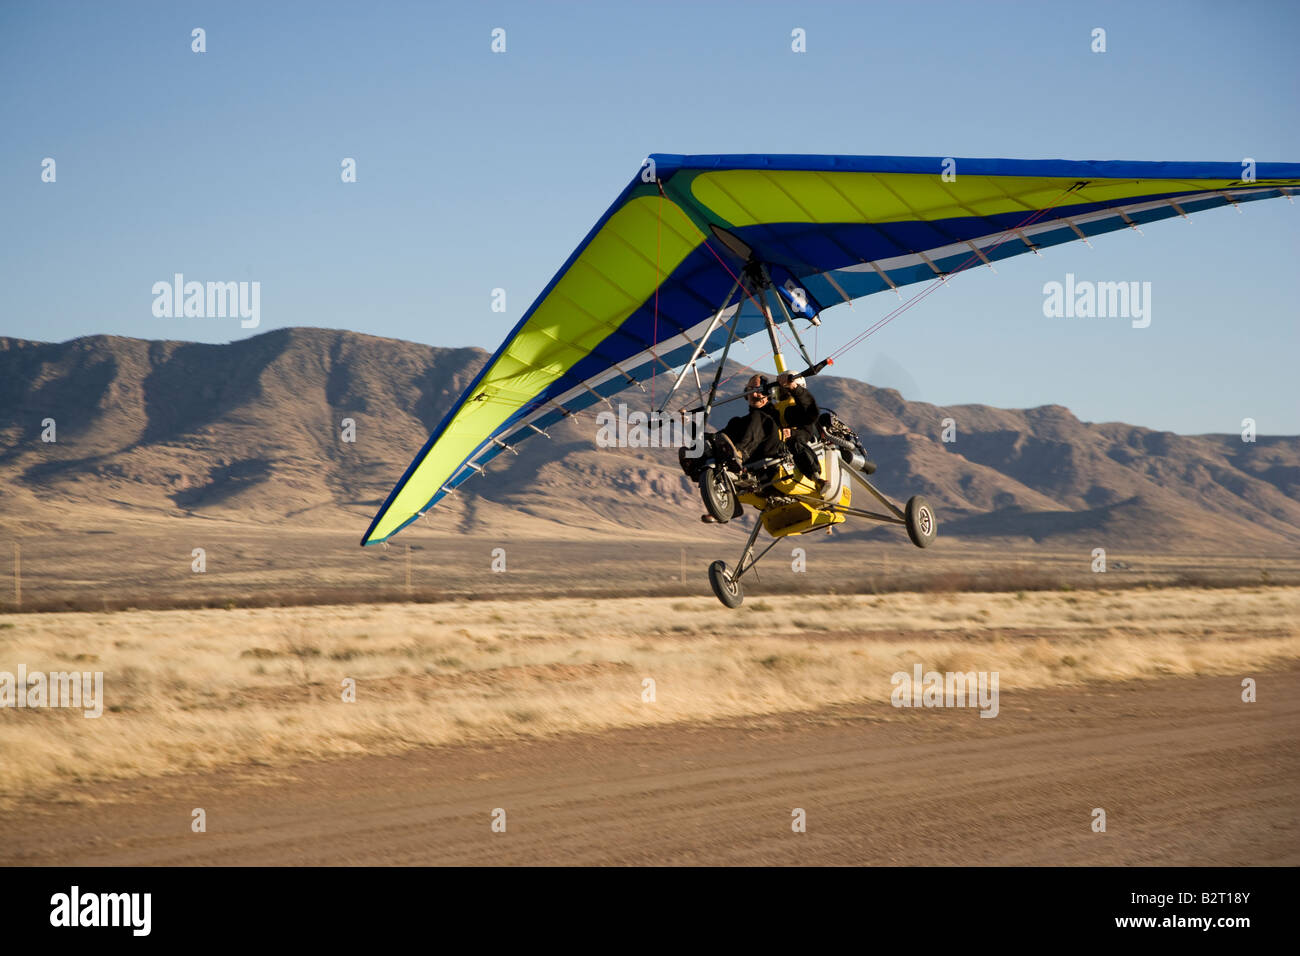 Kite-winged aircraft taking off at the Sky Gypsy Complex desert airstrip New Mexico USA Stock Photo